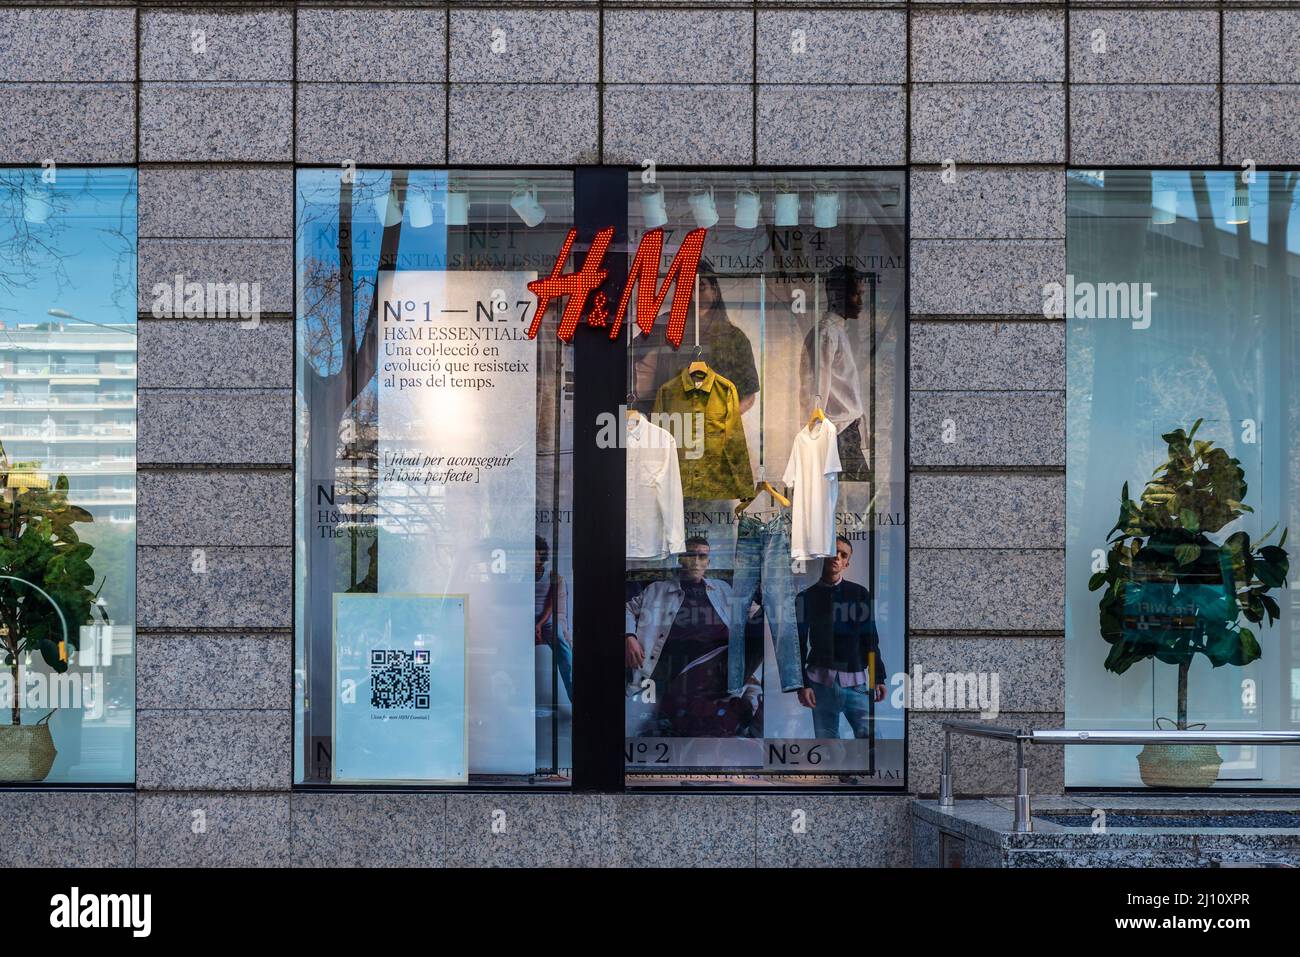 Barcelona, Spain - February 24, 2022: Facade of a HM or H&M clothing store  in Diagonal avenue, a shopping street of Barcelona, Catalonia, Spain Stock  Photo - Alamy